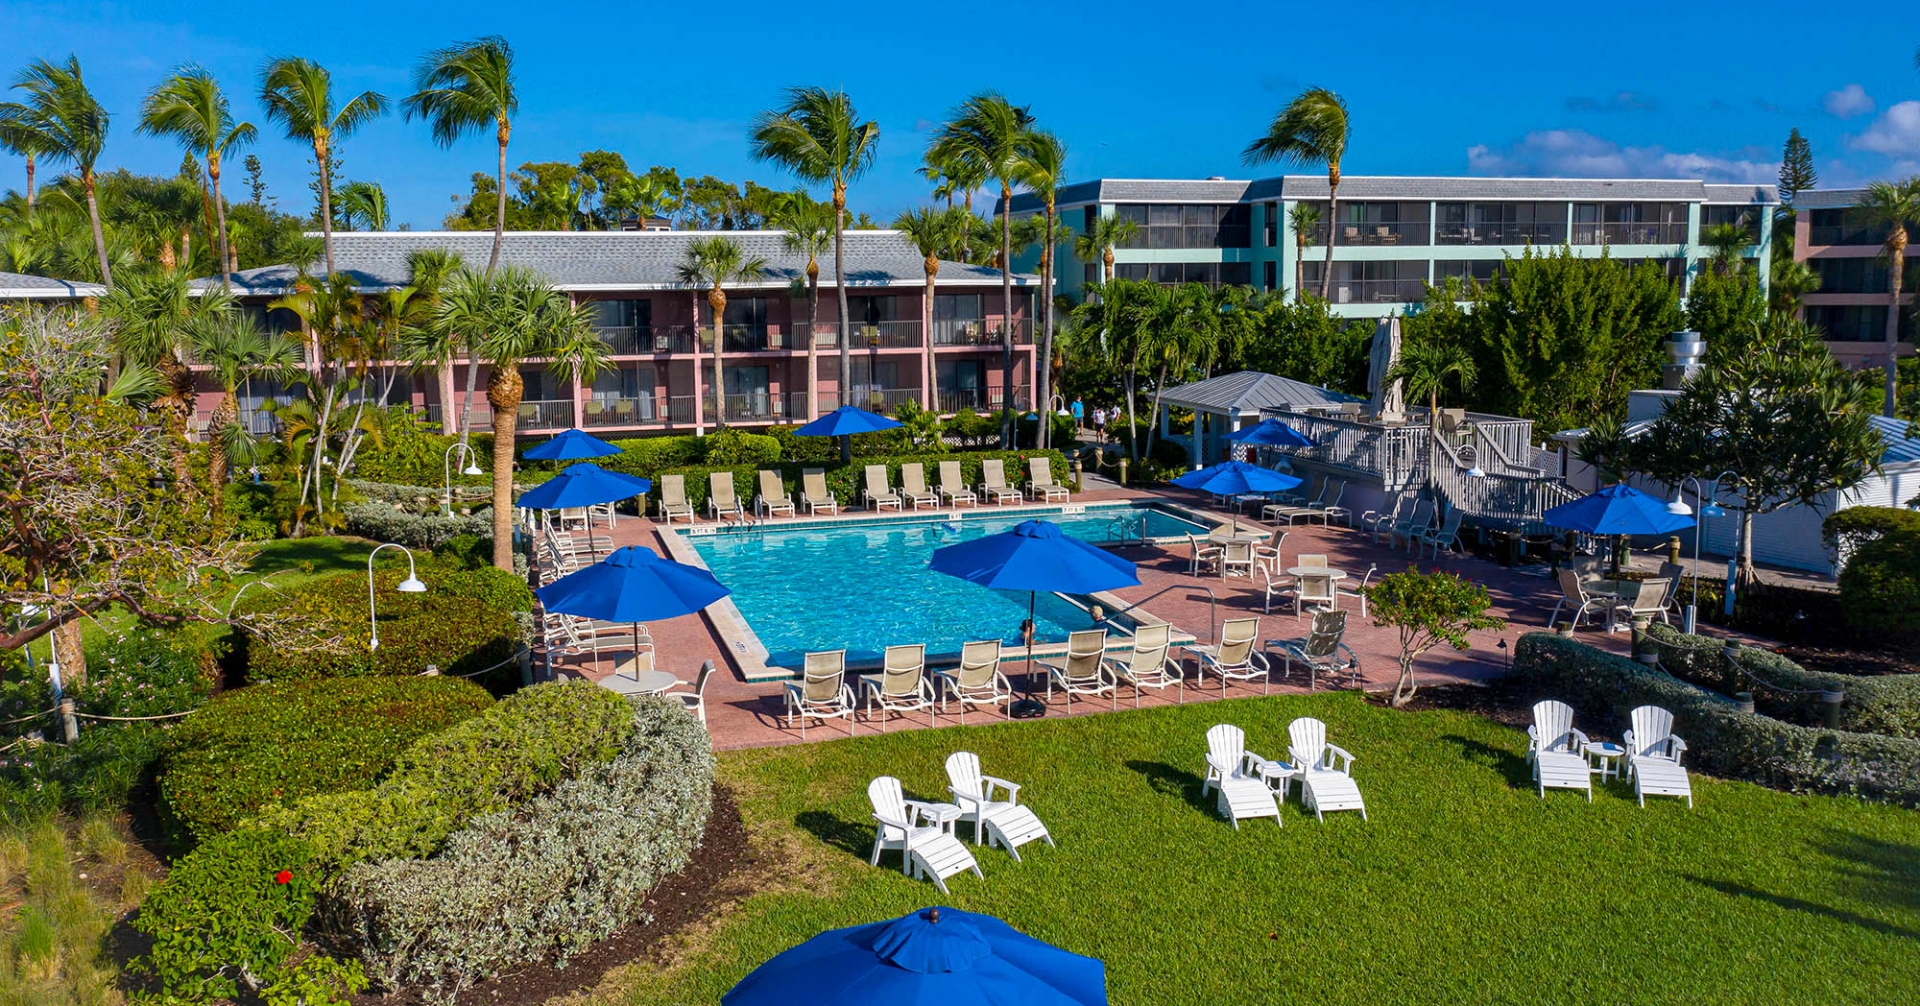 Pool view of the top rated Sanibel Island Hotel